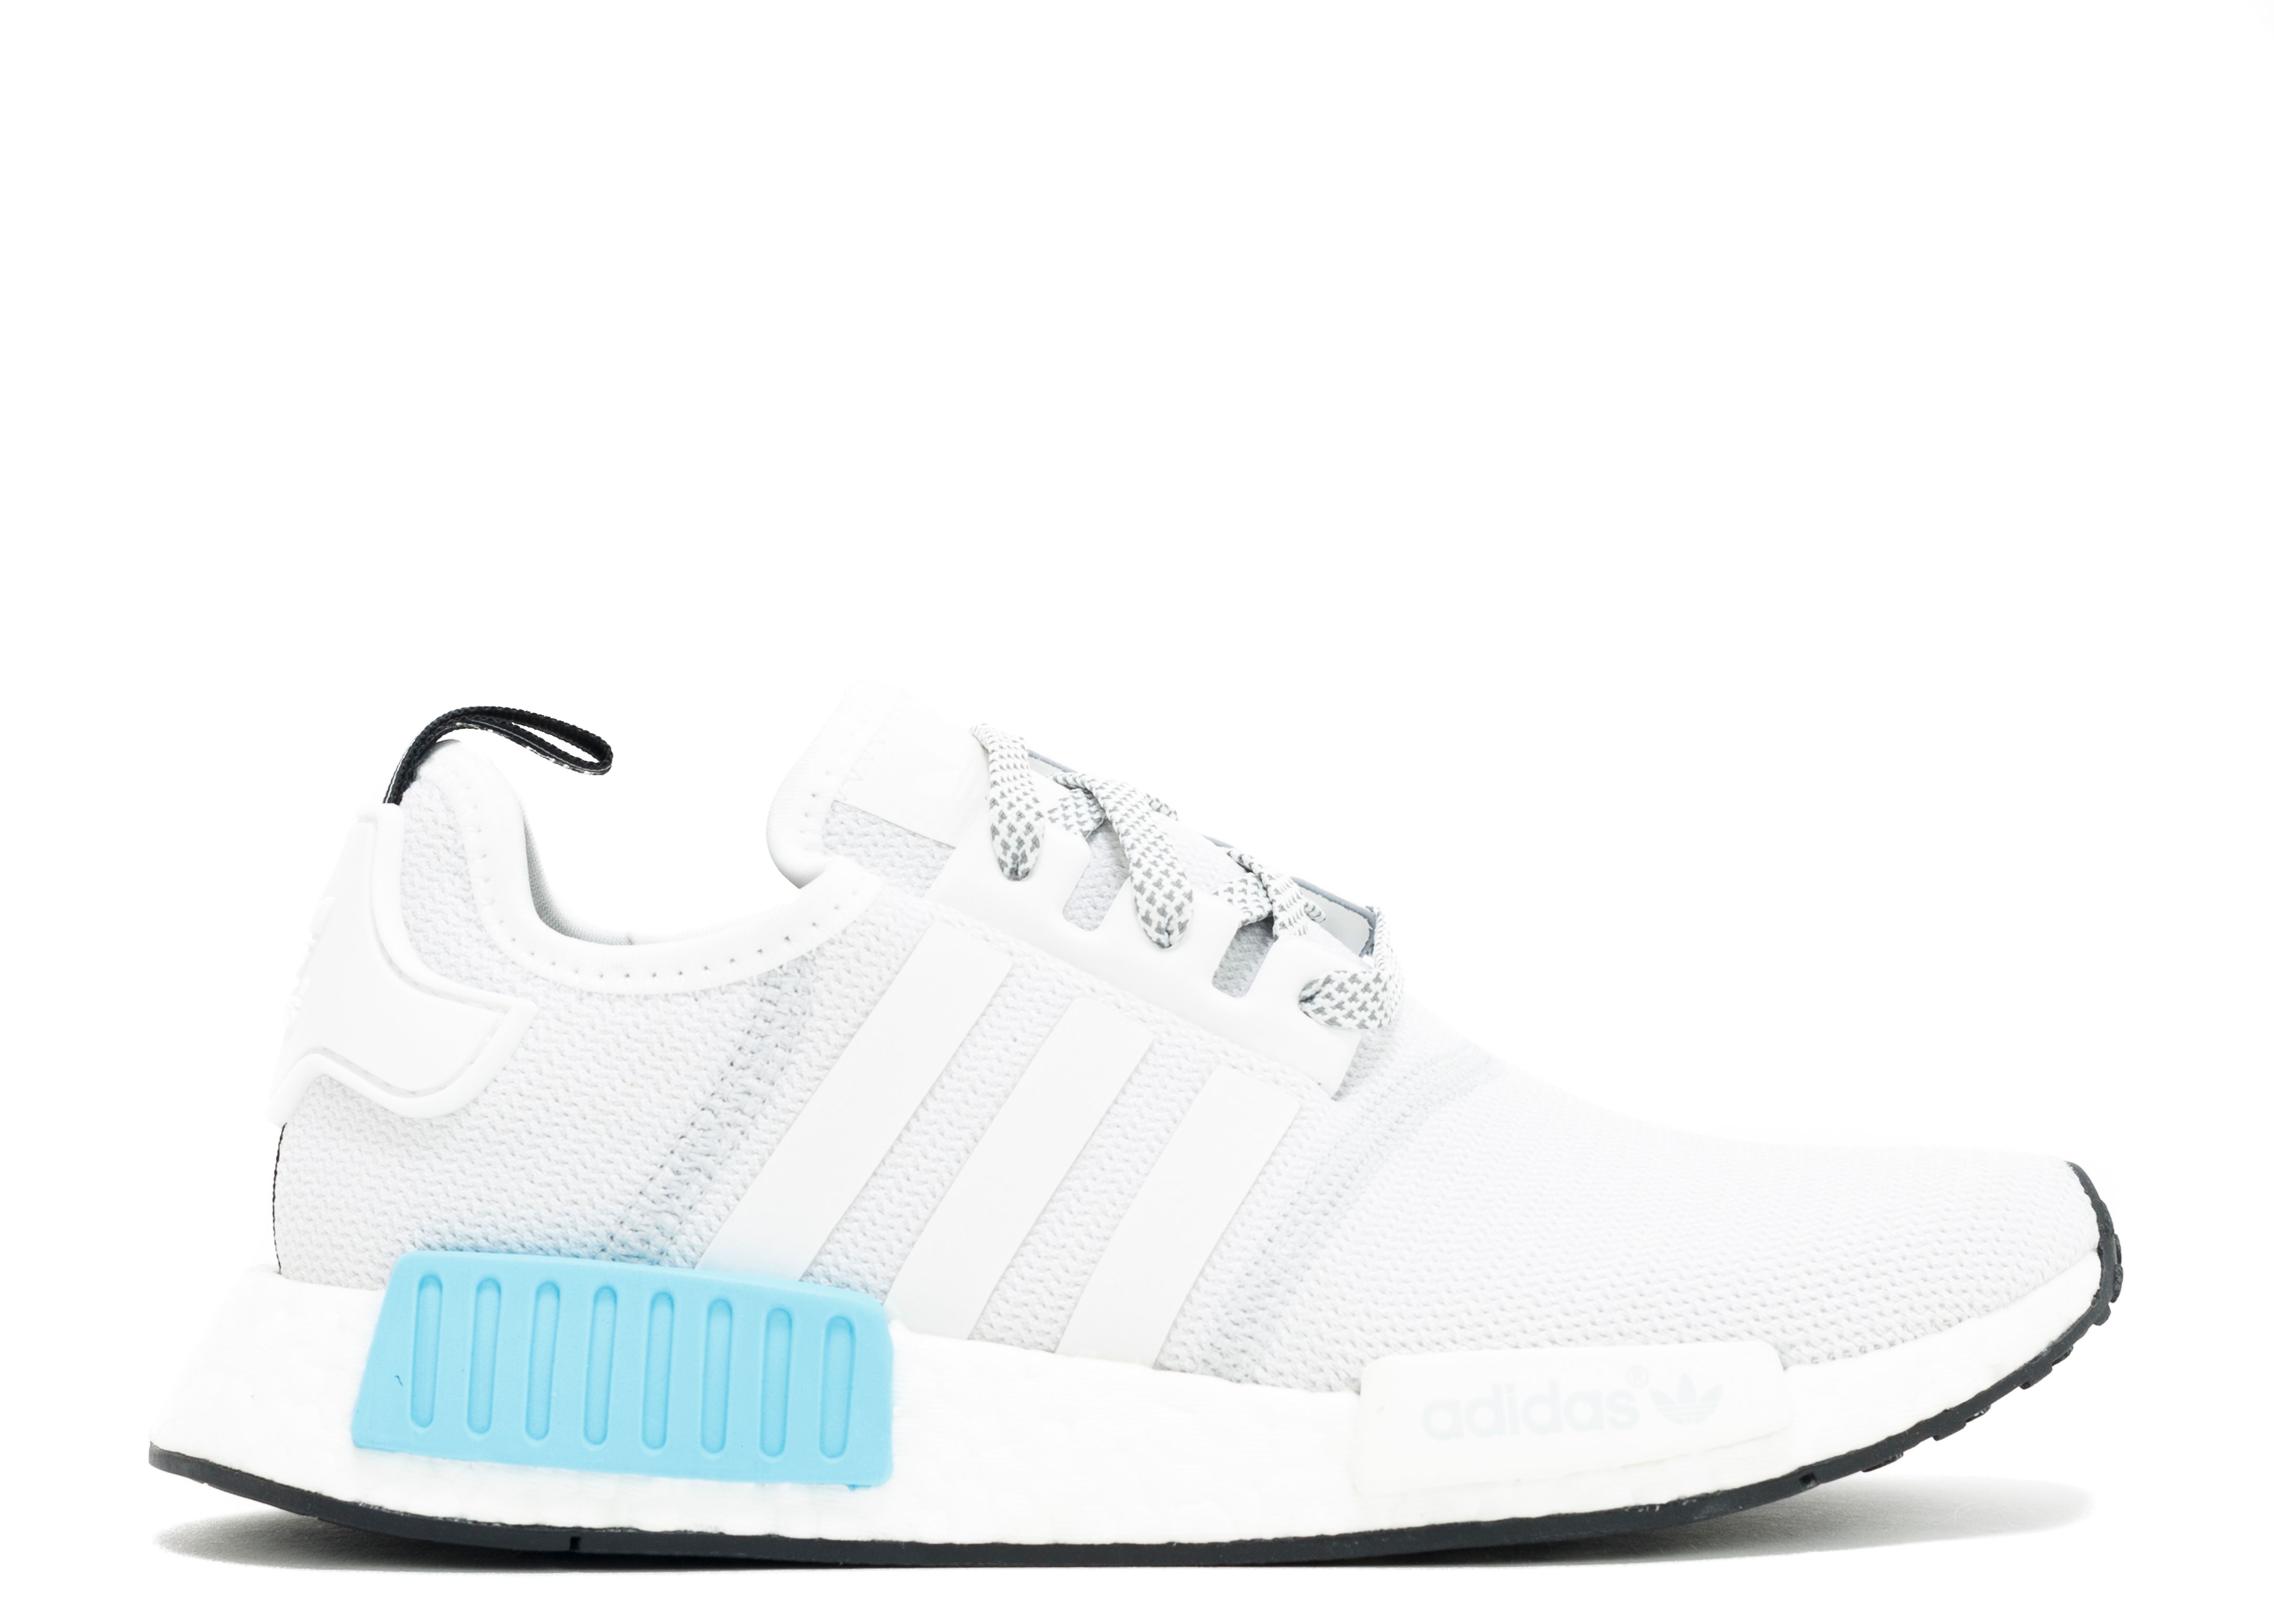 nmd adidas white and blue